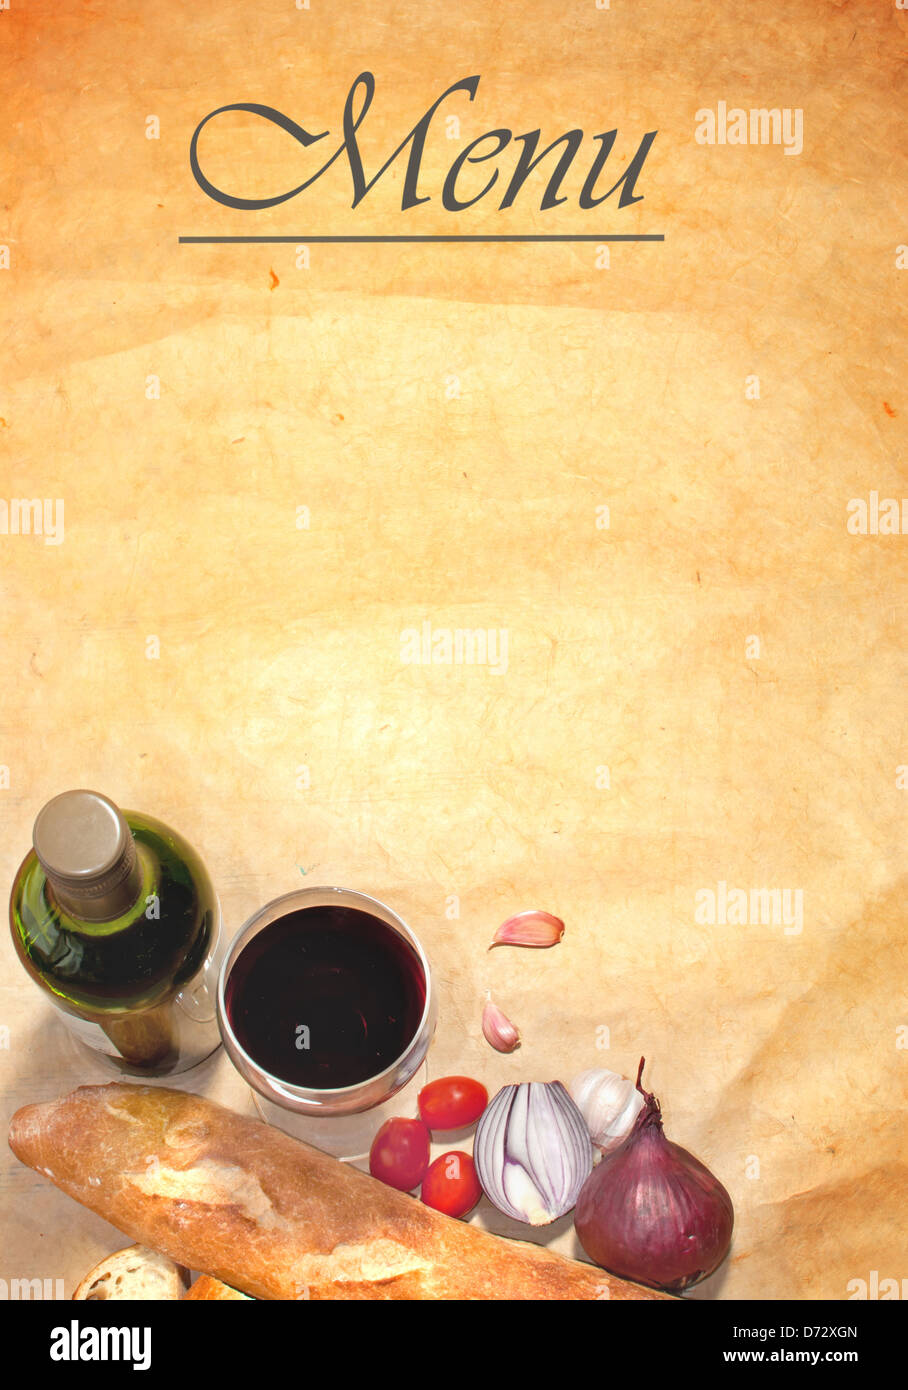 Menu Background Frame With Basic Ingredients Including Bread